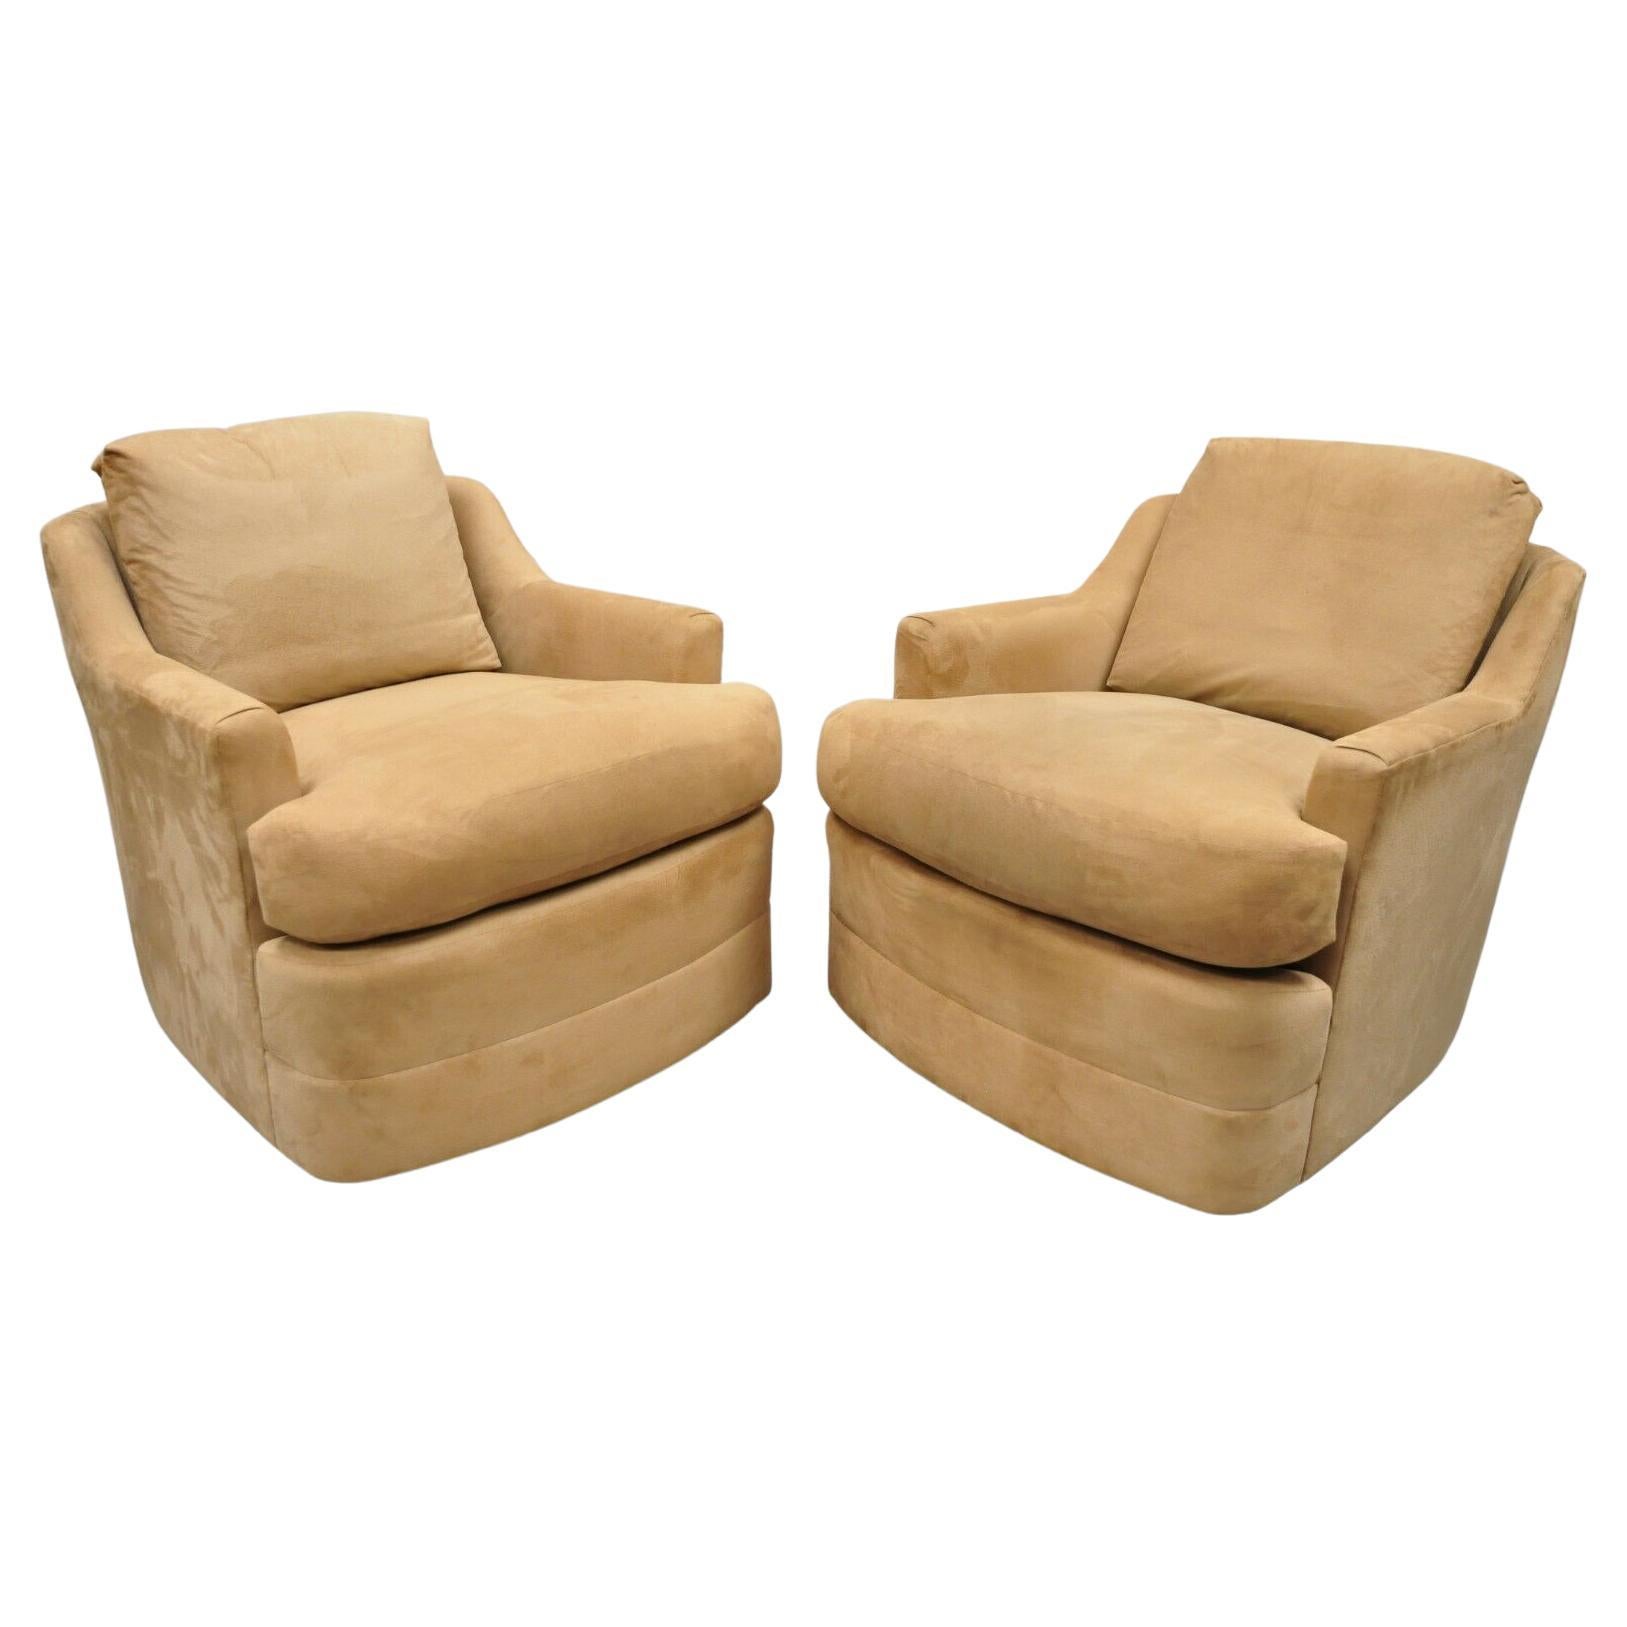 Vintage Mid-Century Modern Swivel Brown Upholstered Lounge Club Chairs, a Pair